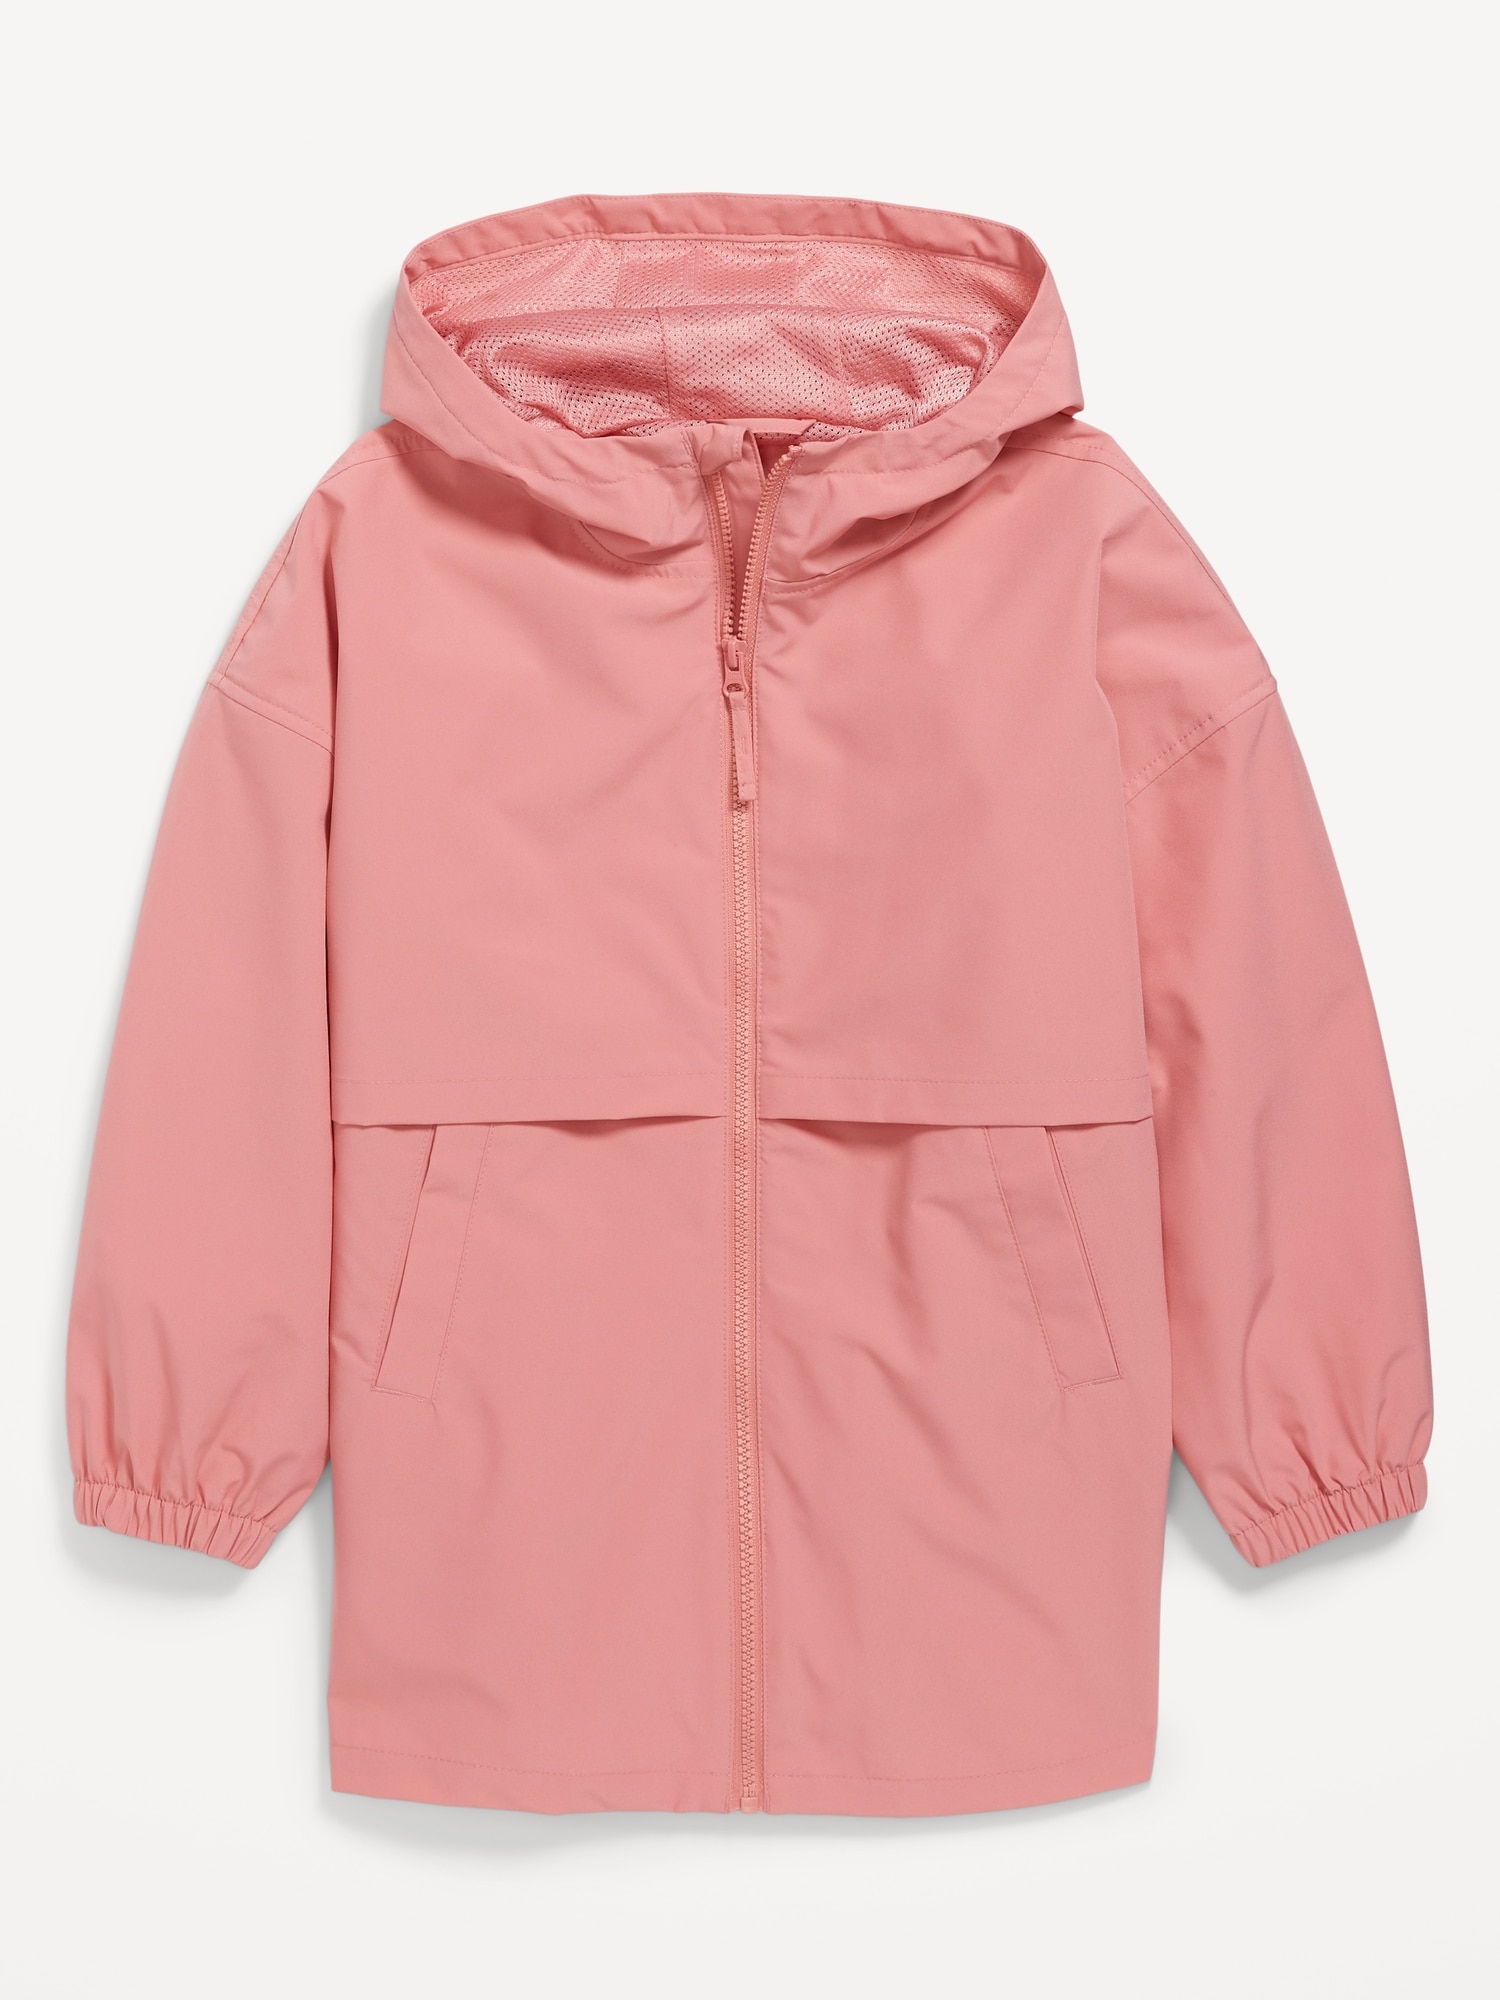 Parka Jacket With Hood | Old Navy